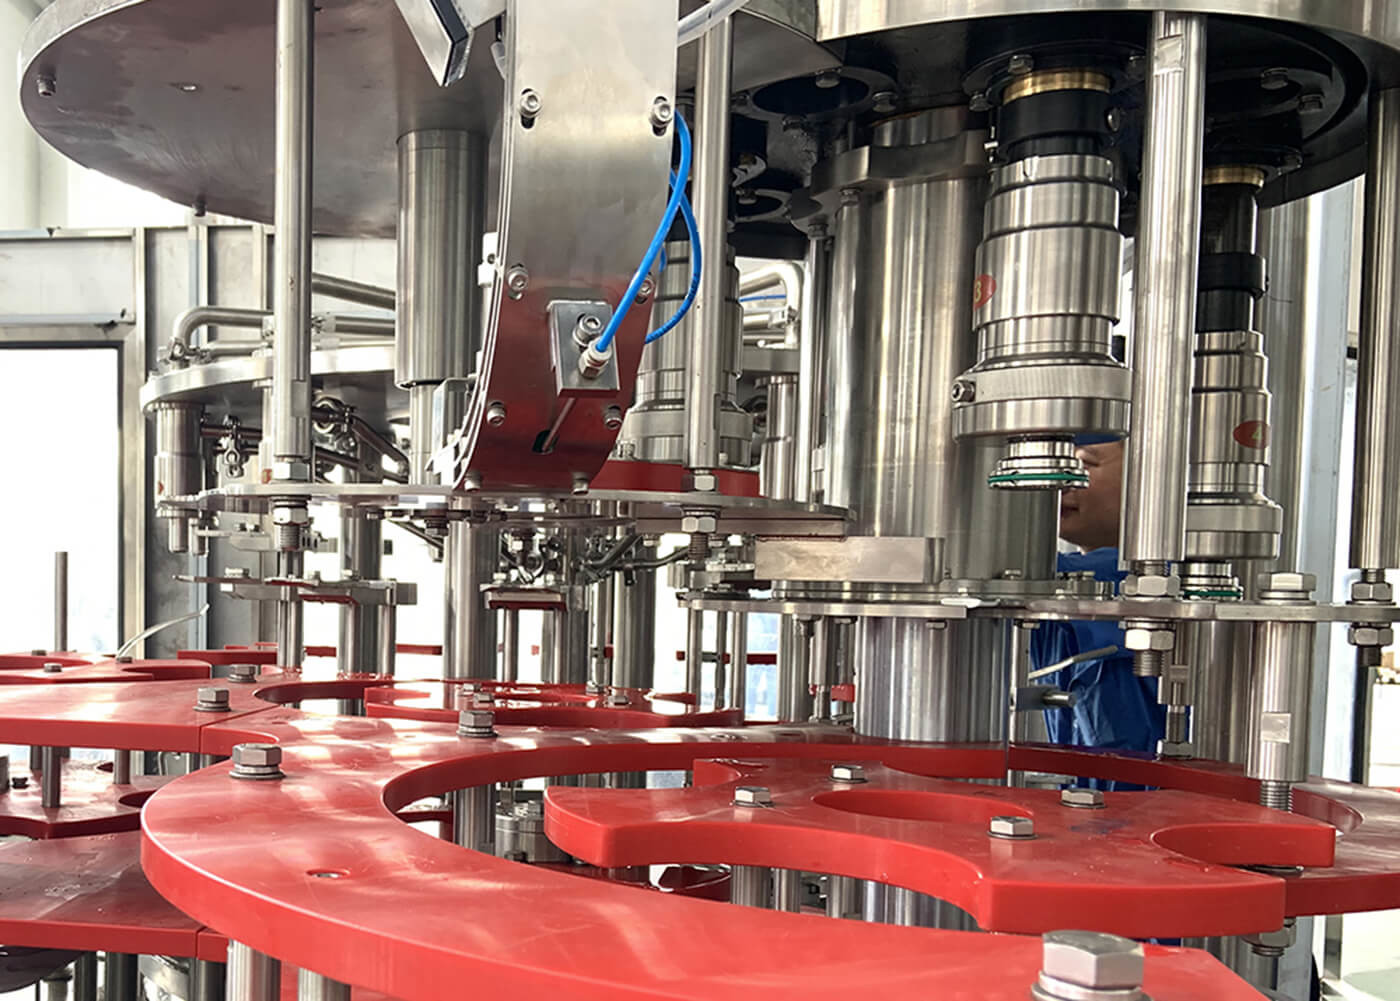 Drinking Water Washing Filling Capping Bottling Production Line For 3L - 15L Gallon Jar